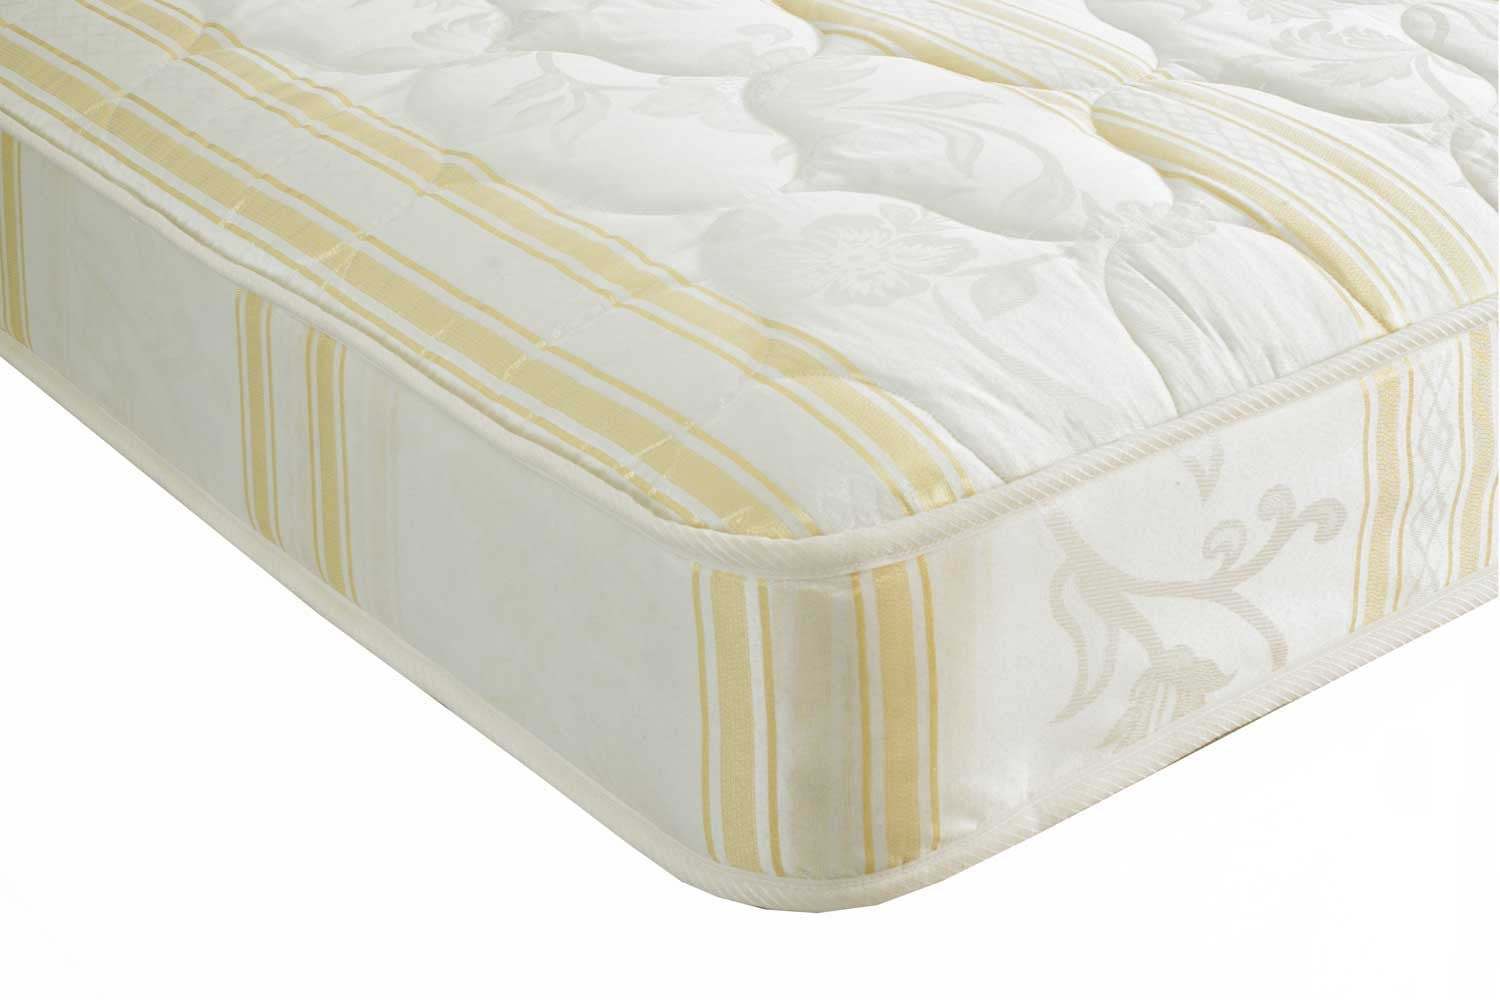 crown back care mattress review